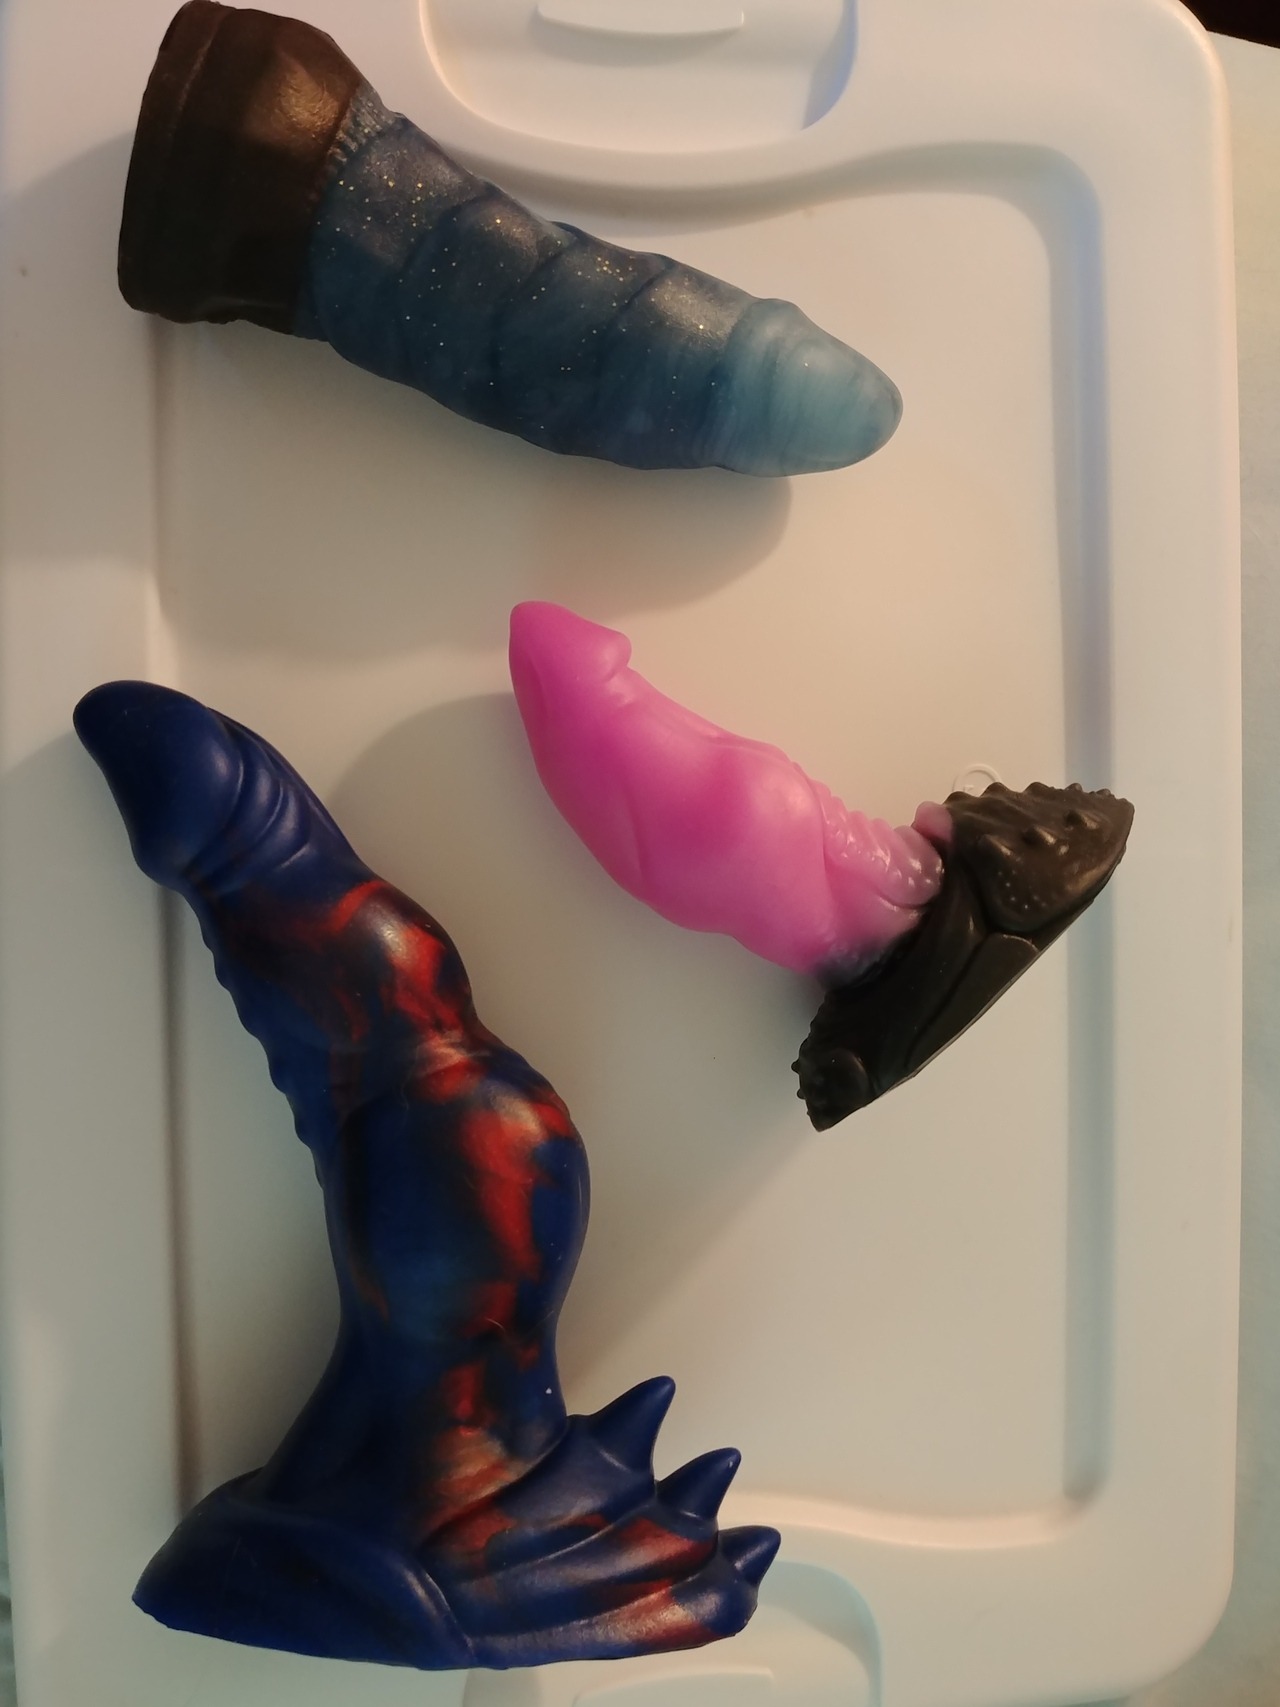 silidongs: Looking to sell a couple toys.  BD Xar - mini, soft, $20 BD Nocturne -